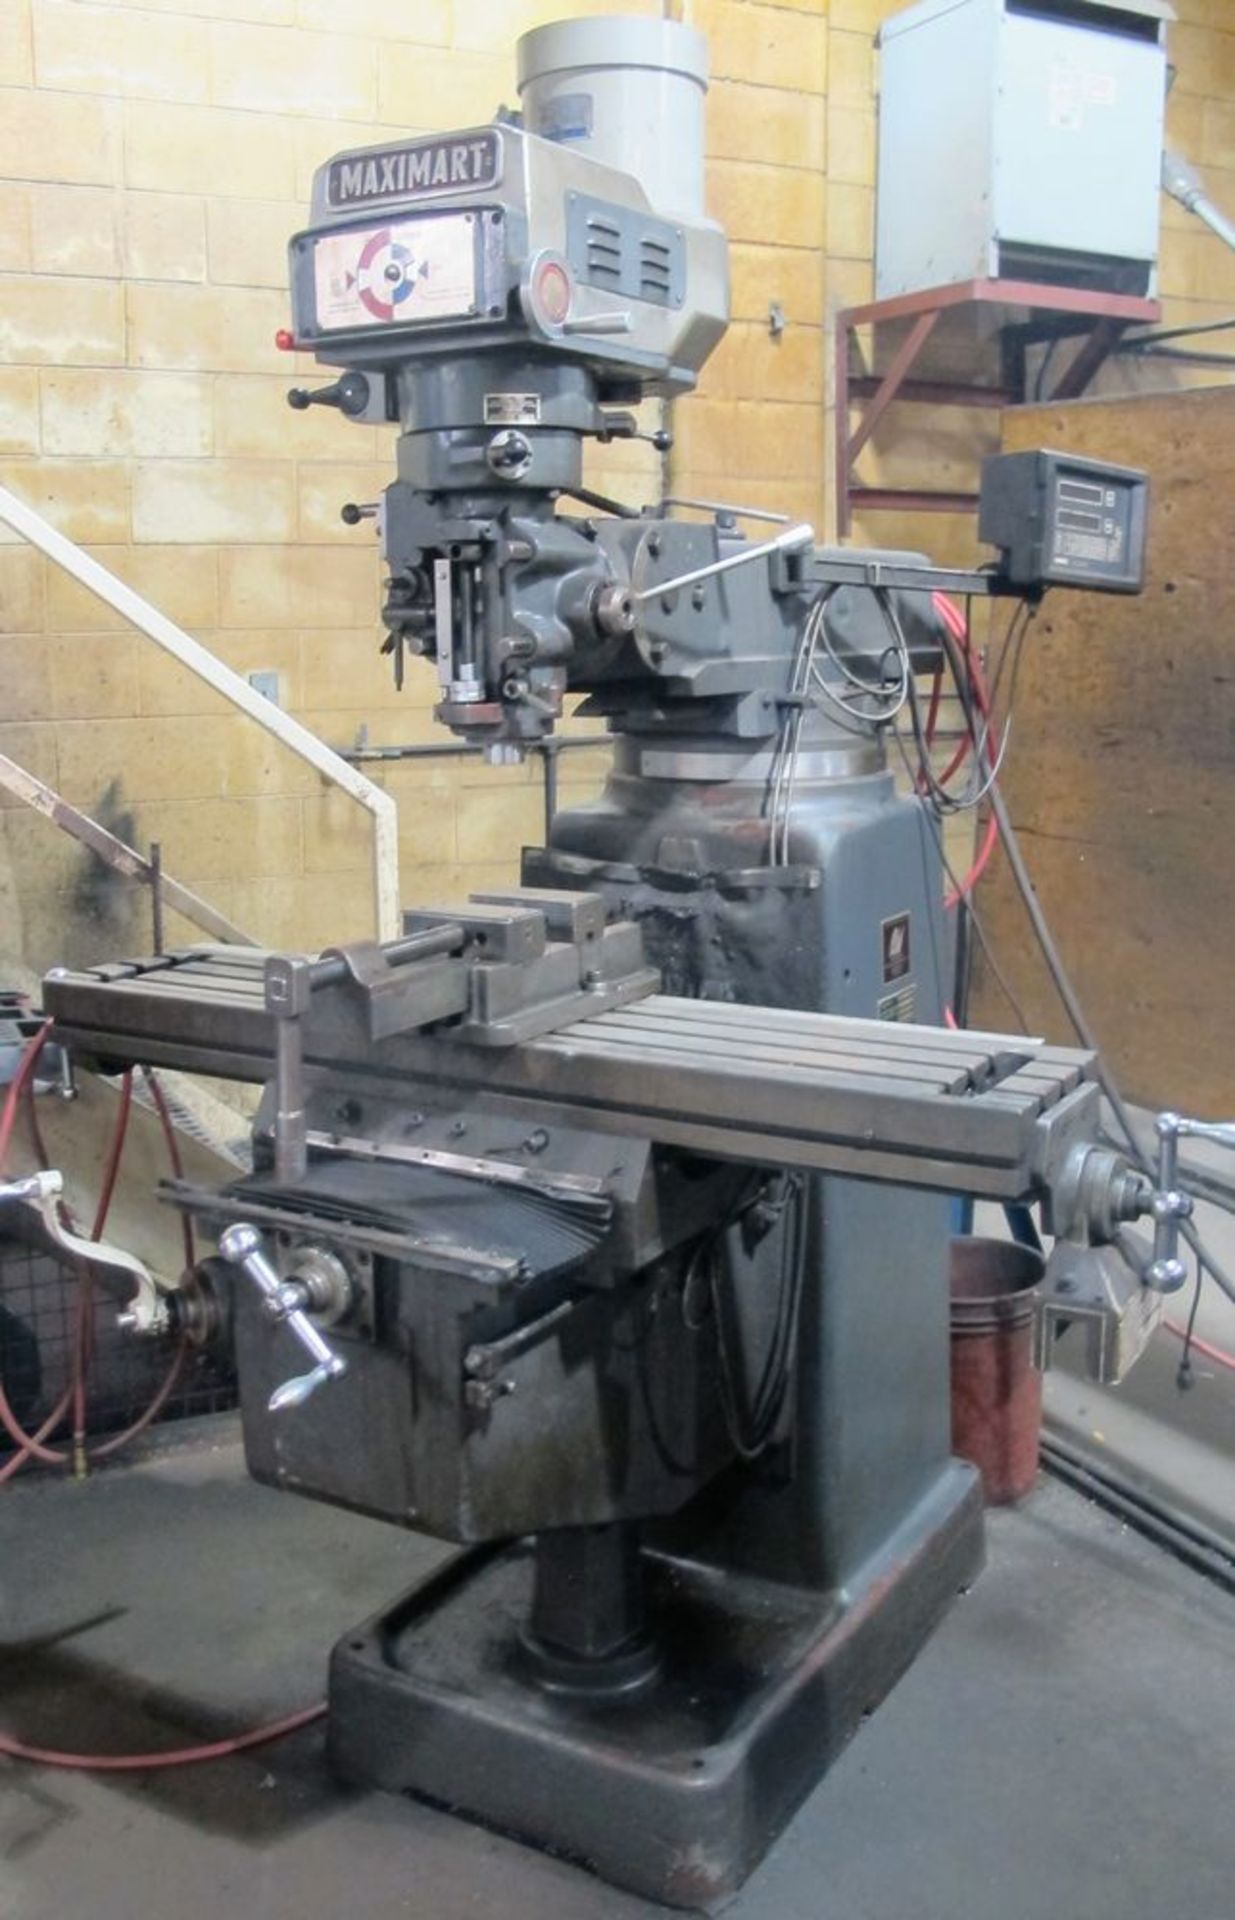 MAXIMART S-3VS Vertical Milling Machine, s/n 991073, 10” x 50” Table, Newall 2-Axis DRO, 3HP, 4, - Image 2 of 8